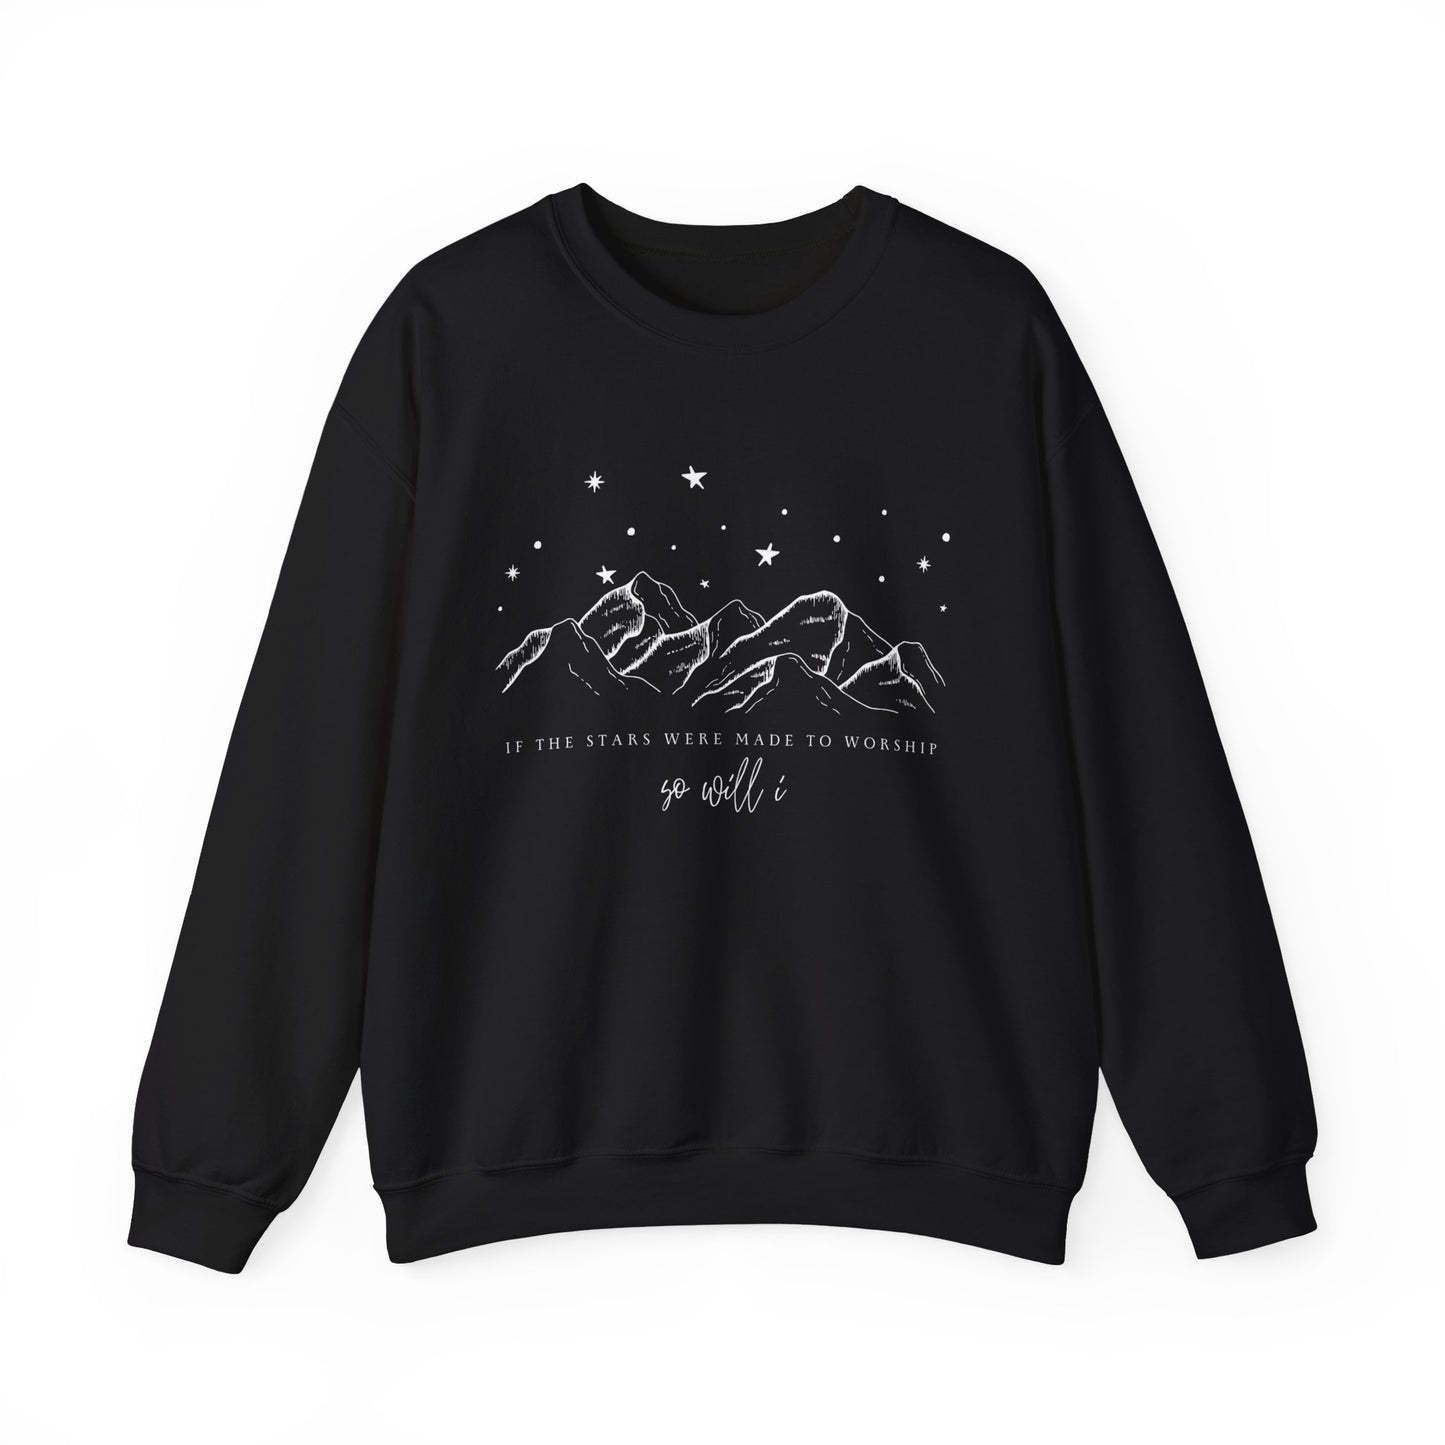 If The Stars Were Made To Worship Scripture Crewneck For Women, Perfect For Religious Students, Teachers, Perfect Gift For Christian Faith, Catholic School Gift & Faithful Individuals